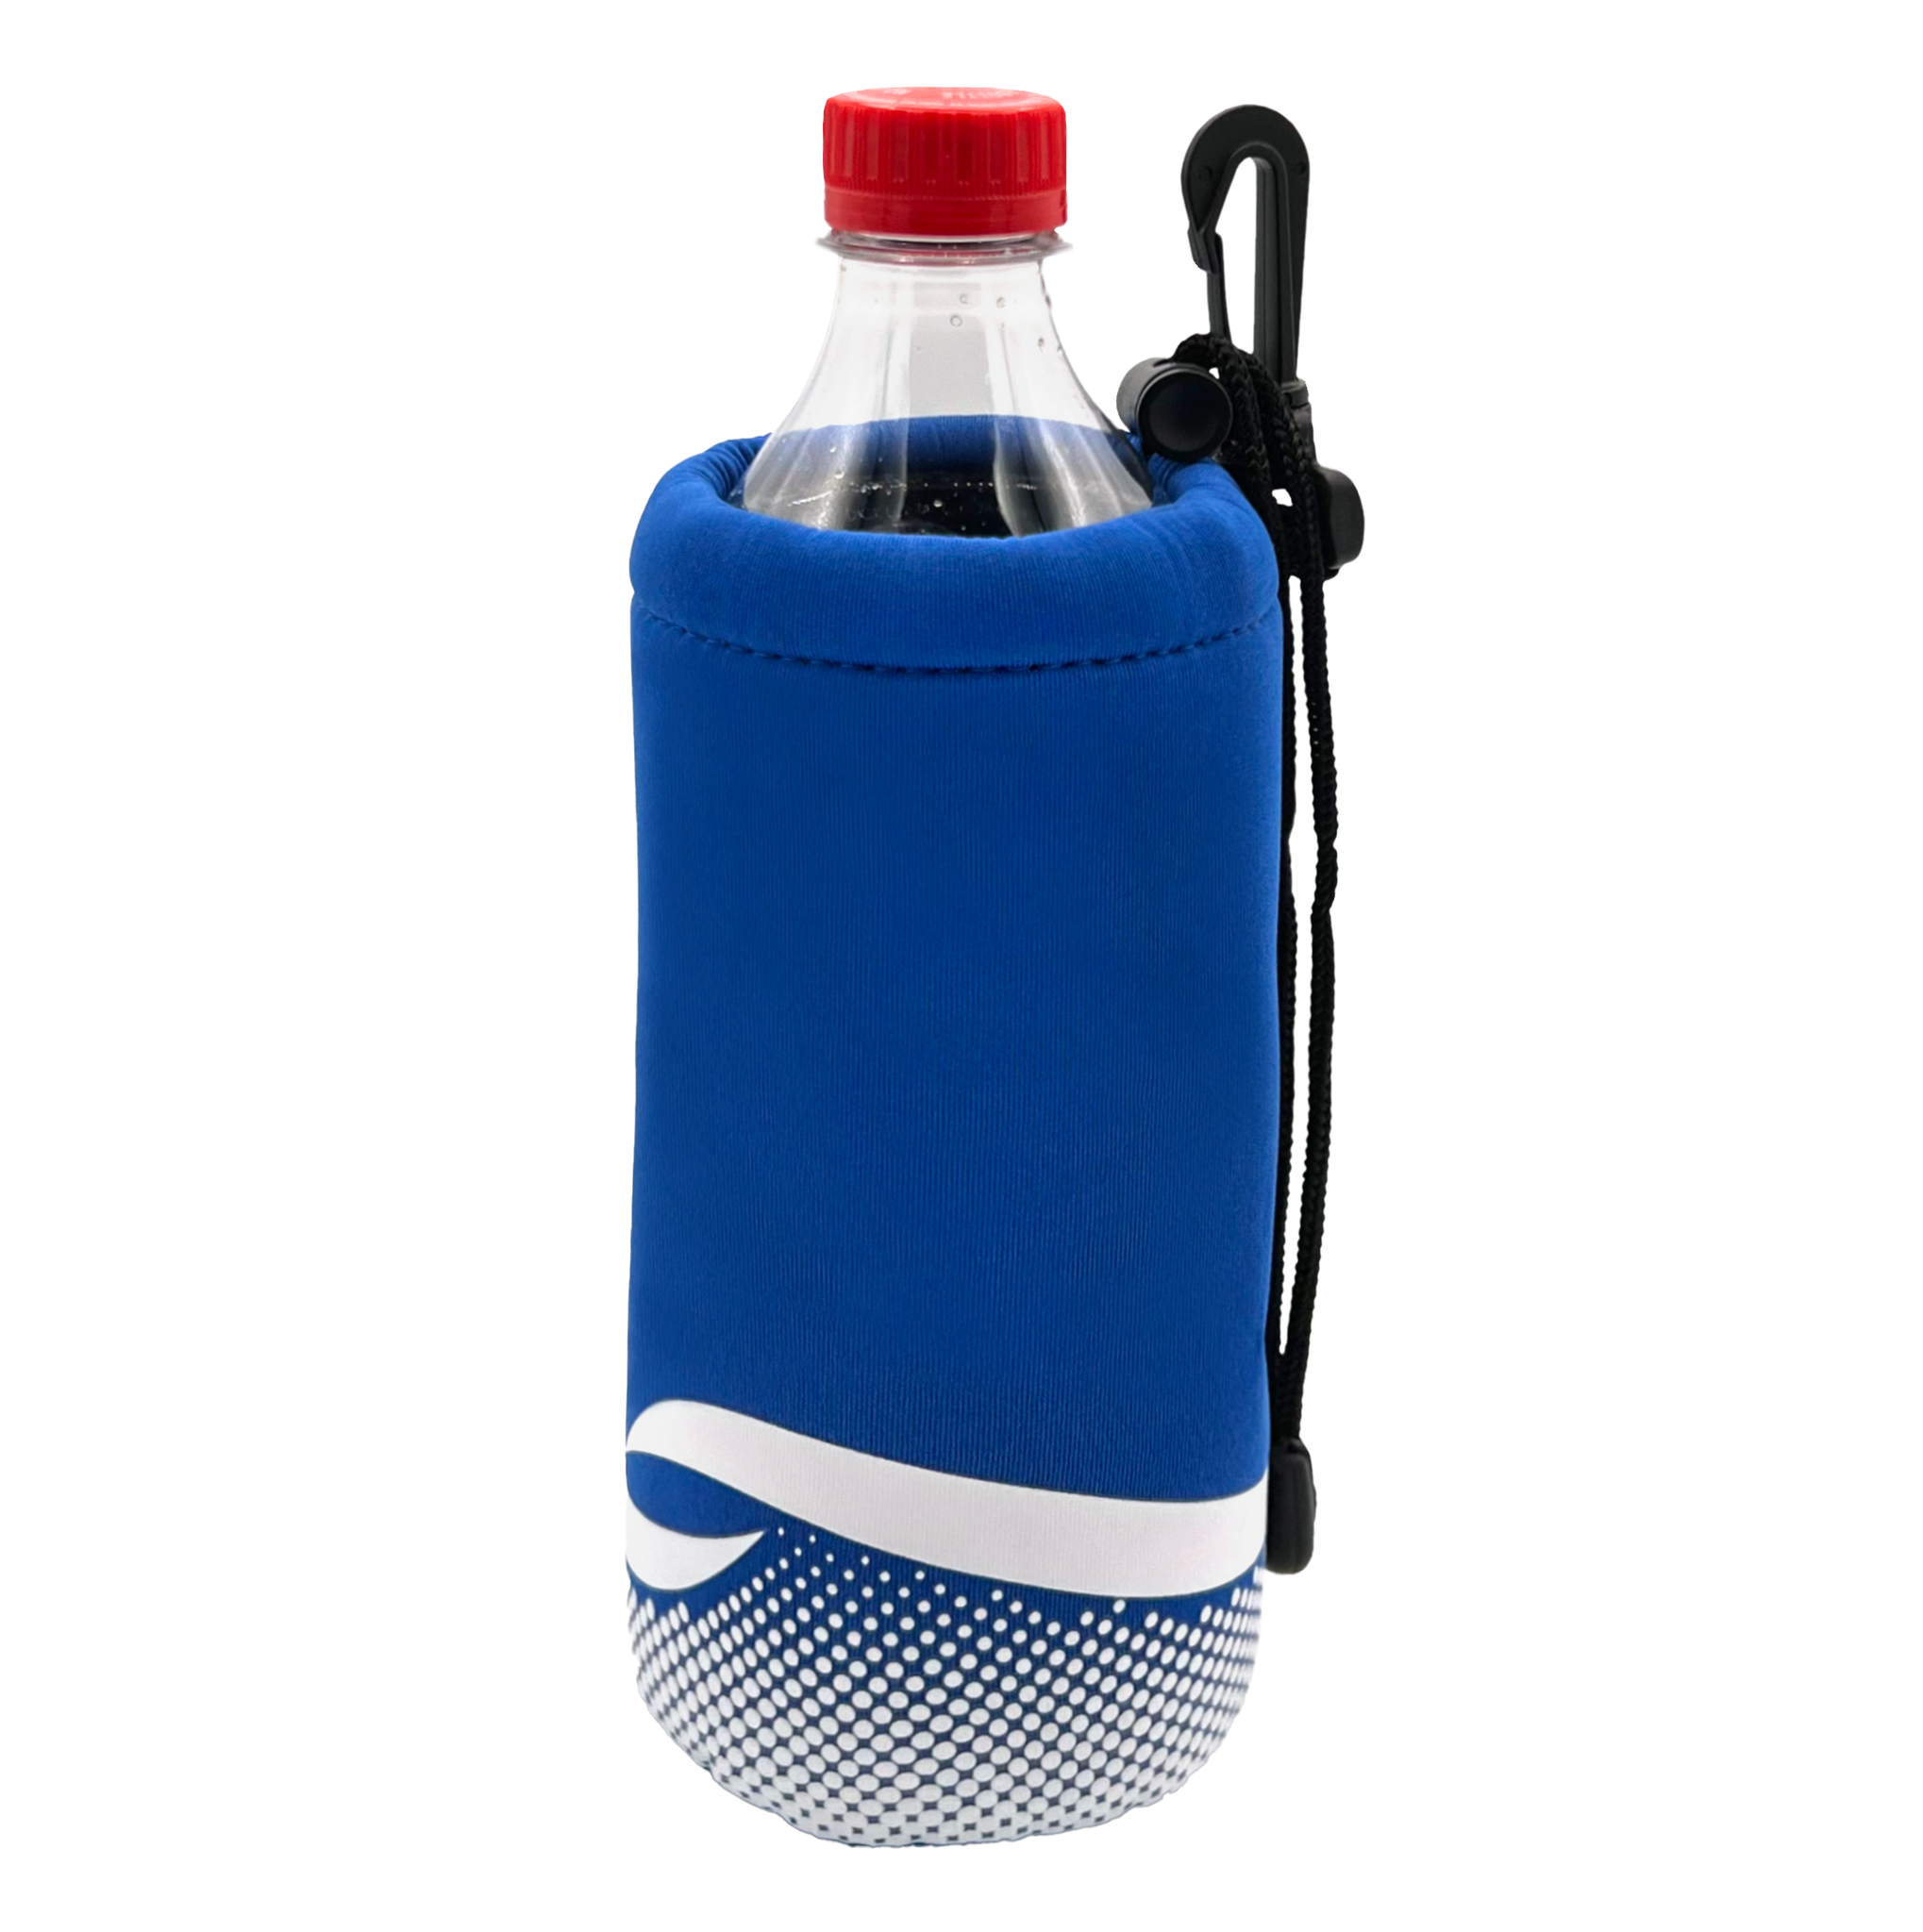 Indianapolis Colts 1/2 Liter Water Soda Bottle Koozie Holder with Clip  Football